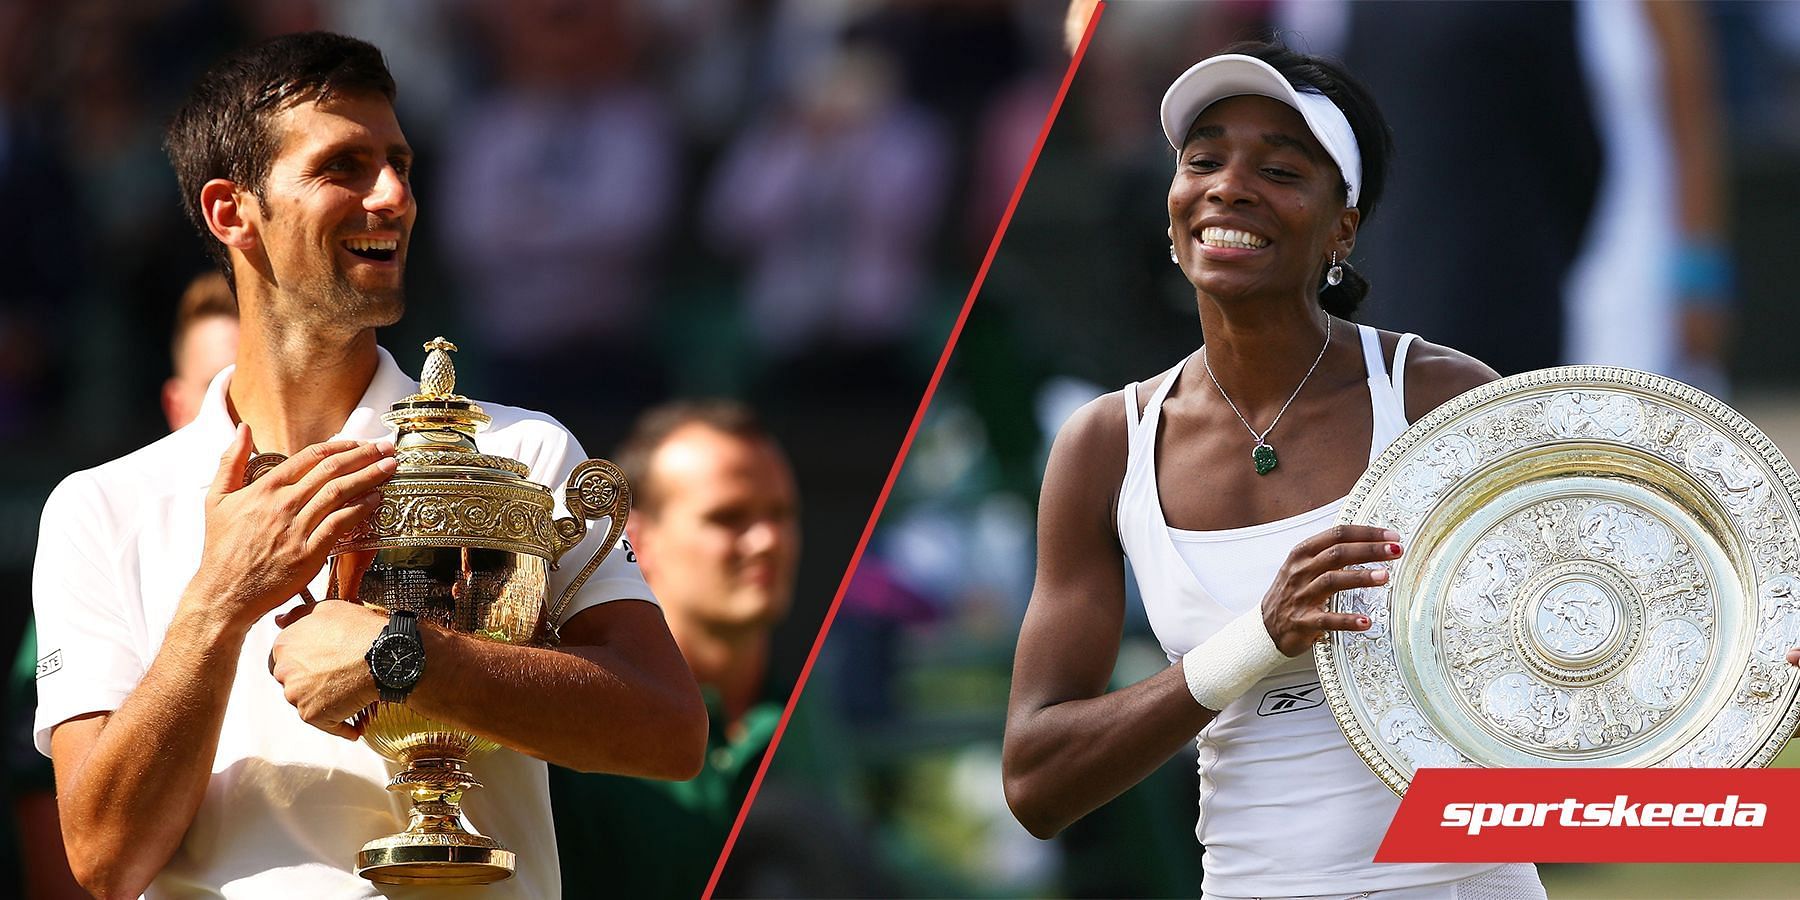 Novak Djokovic and Venus Williams have both won Wimbledon when they were seeded very low